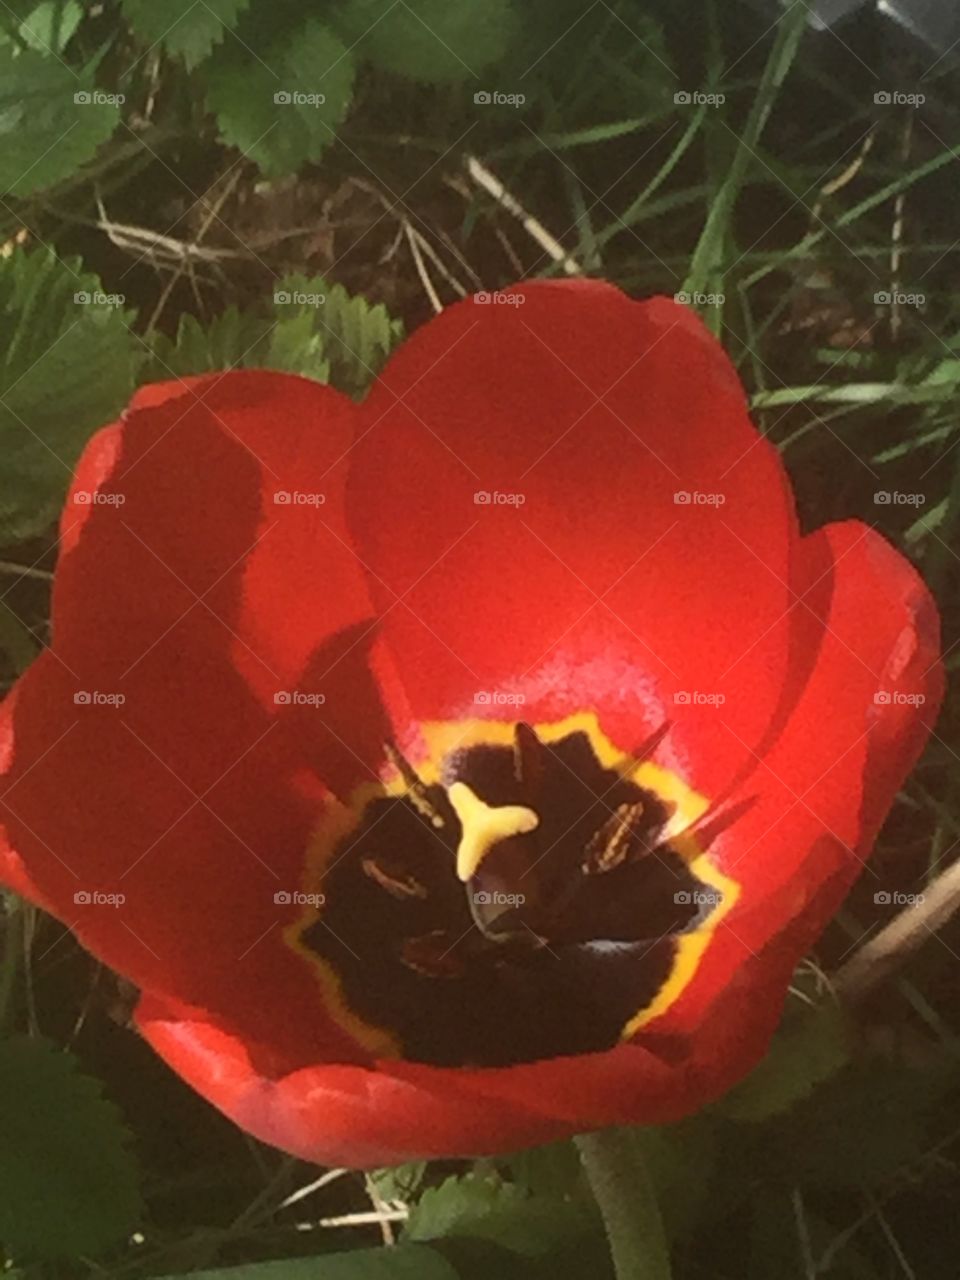 A red tulip in full bloom in southern Sweden.